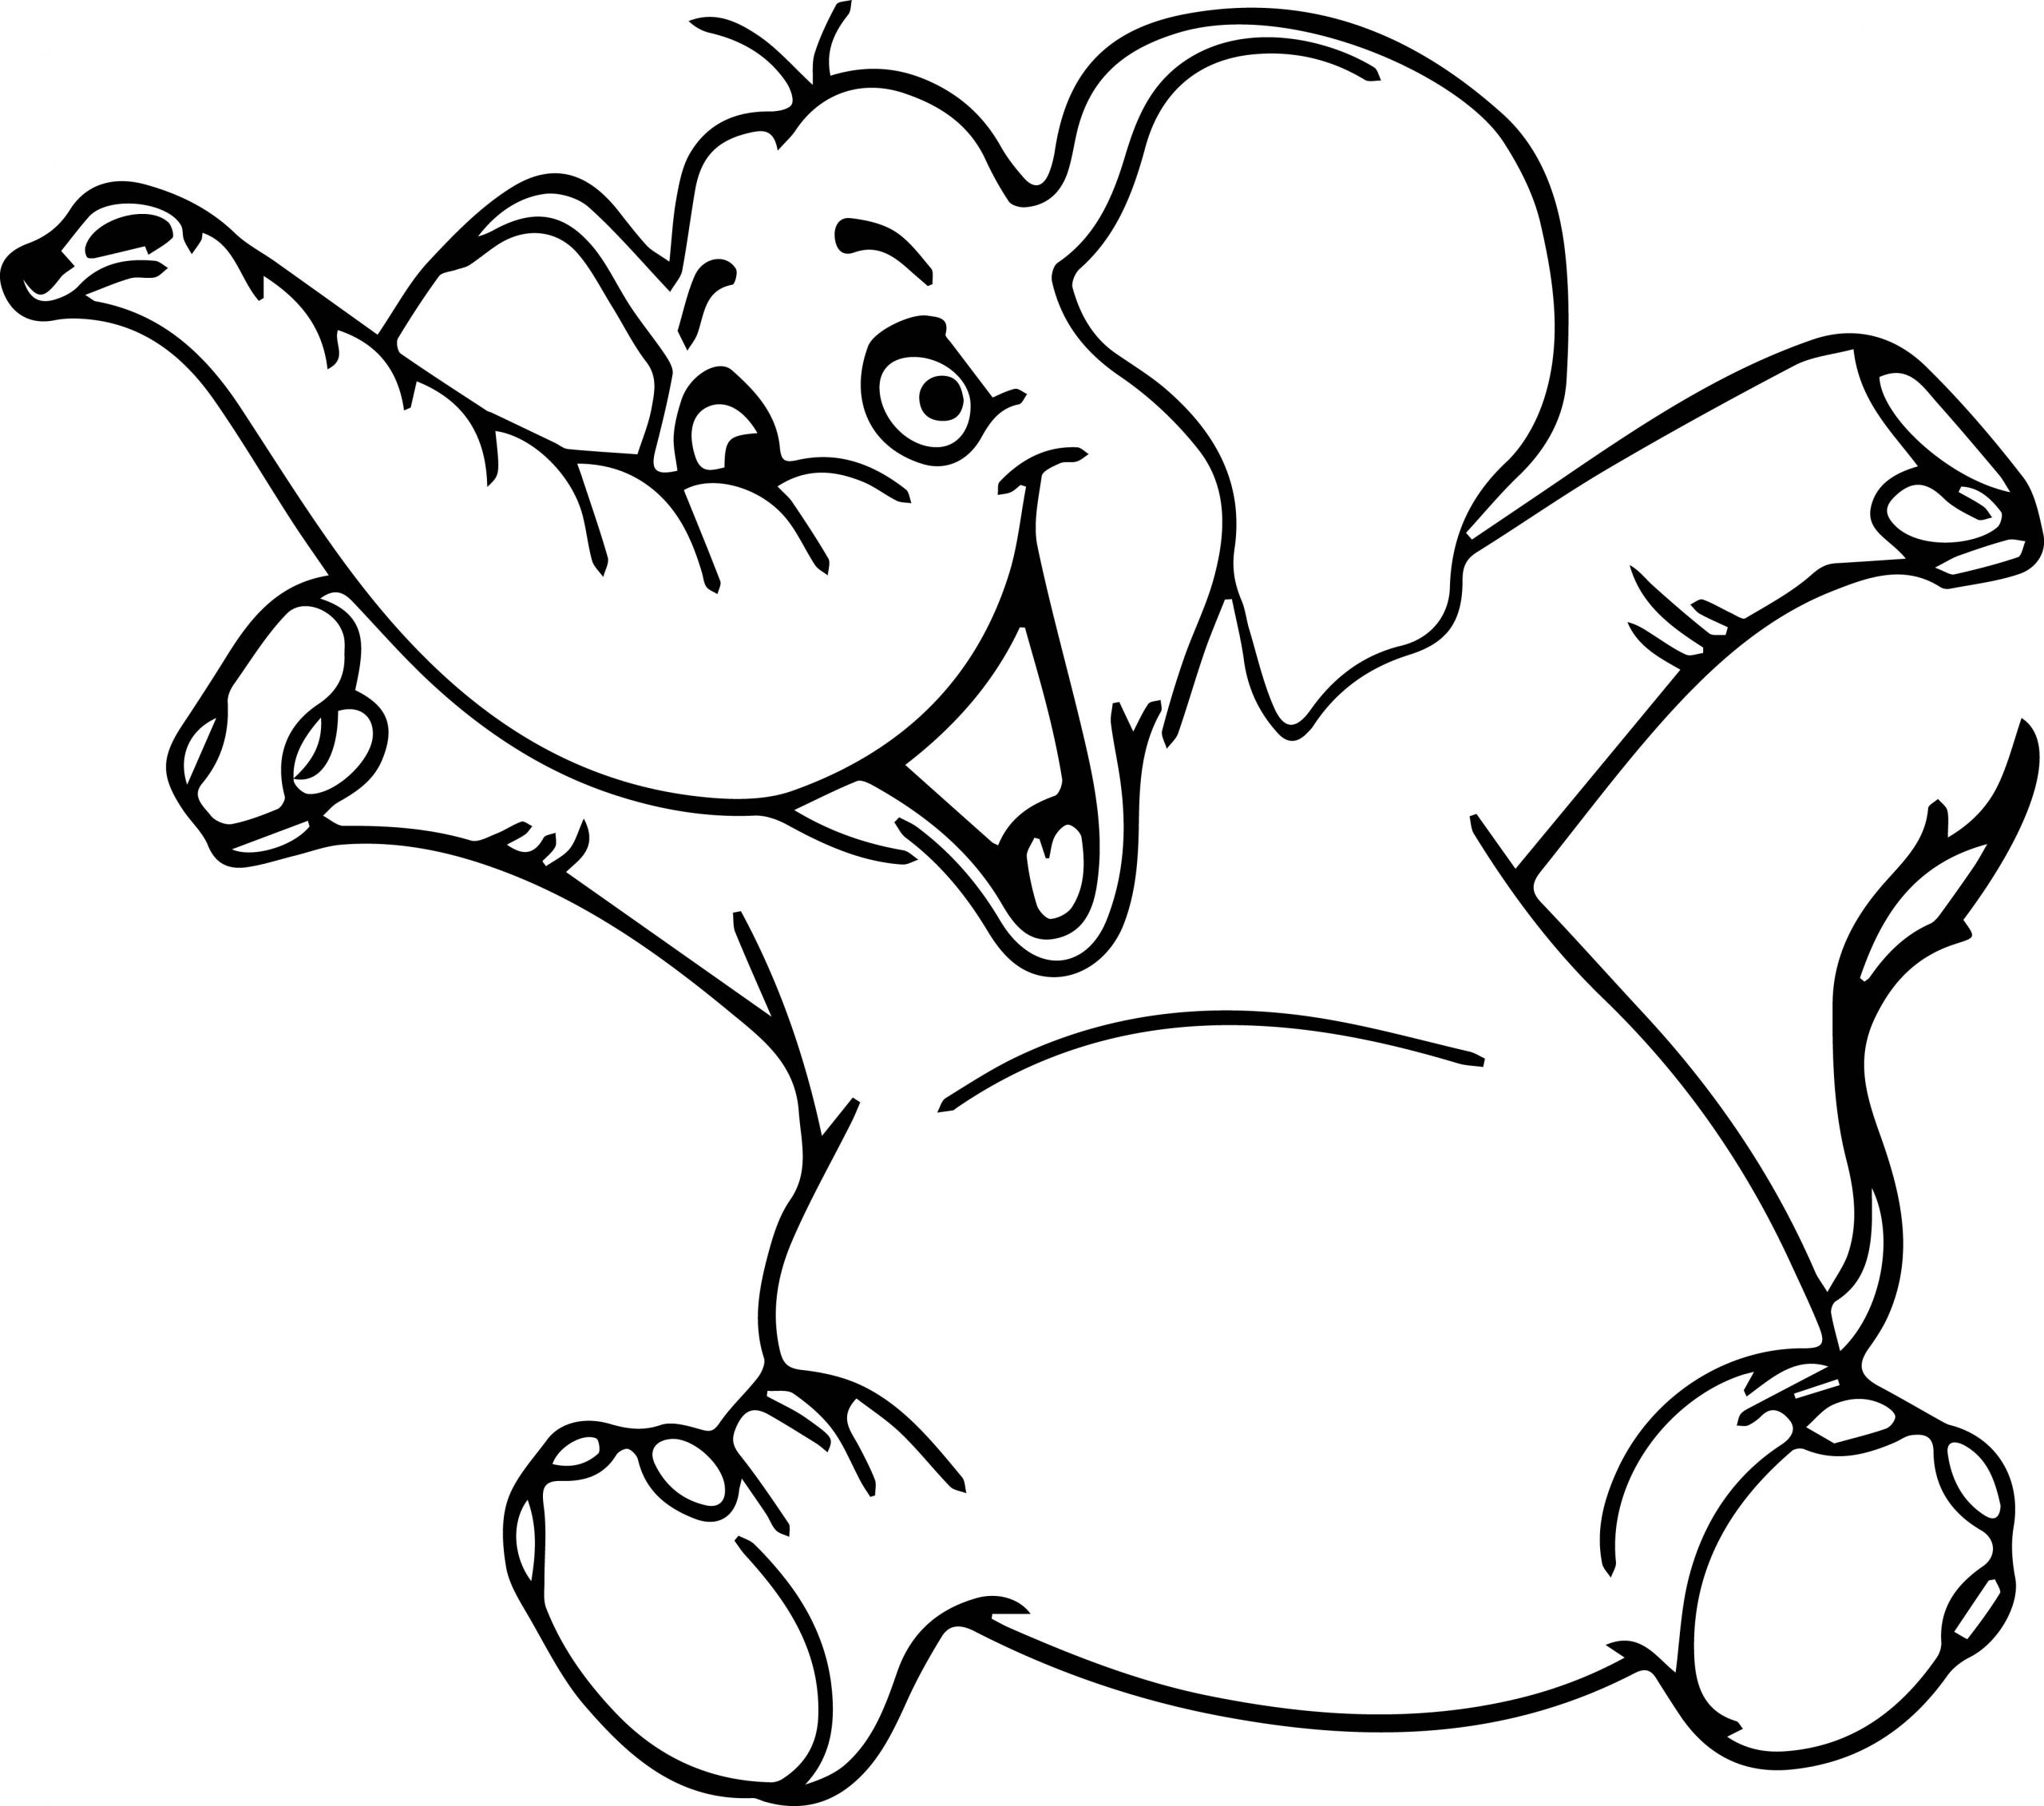 Cute Baby Elephant Coloring Pages
 Cartoon Baby Elephant Coloring Page